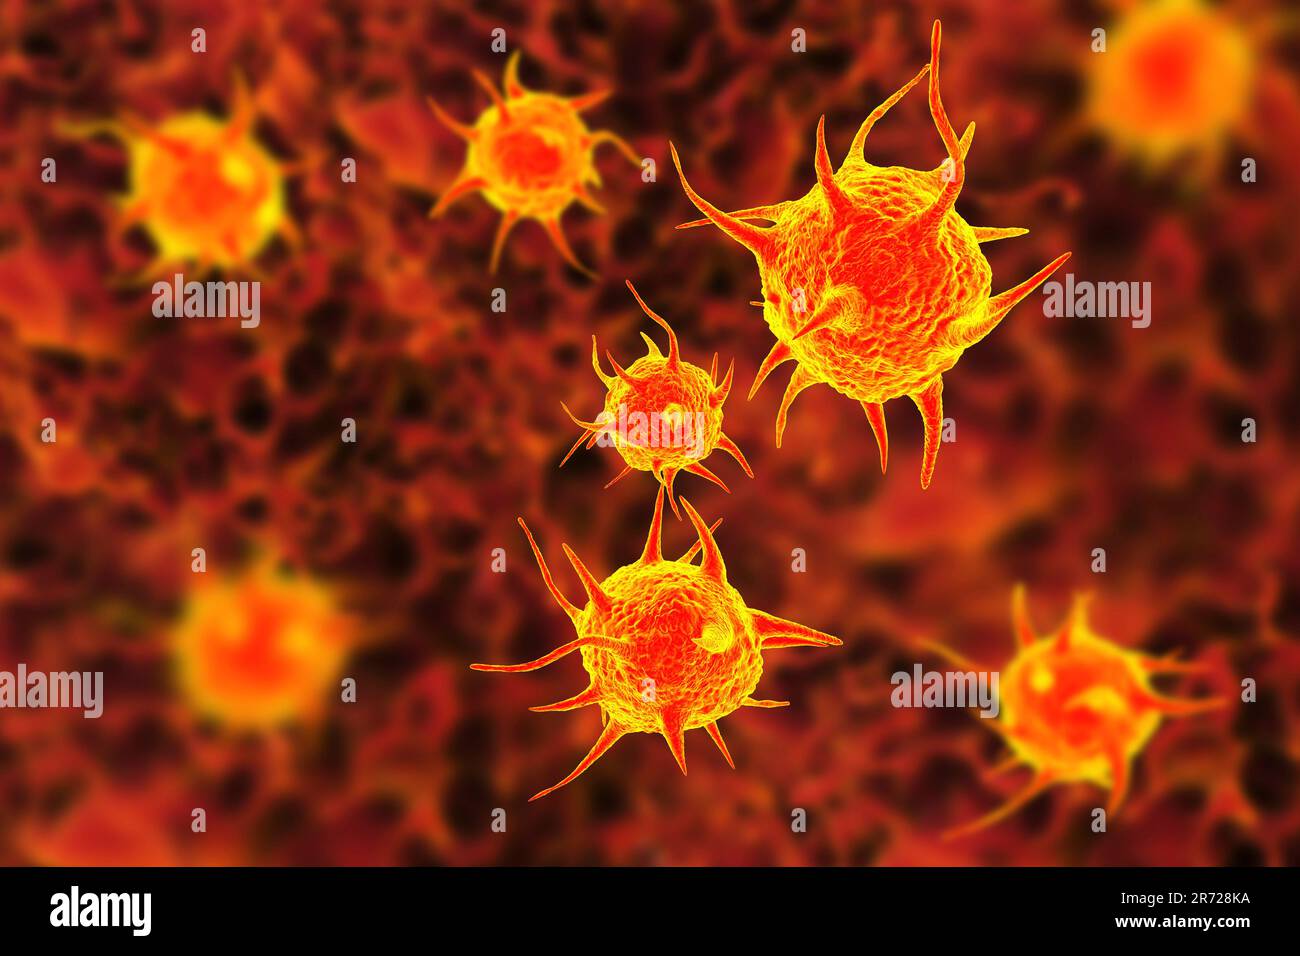 Computer illustration of an abstract pathogenic microorganisms which can be used as a medical or scientific background. Stock Photo